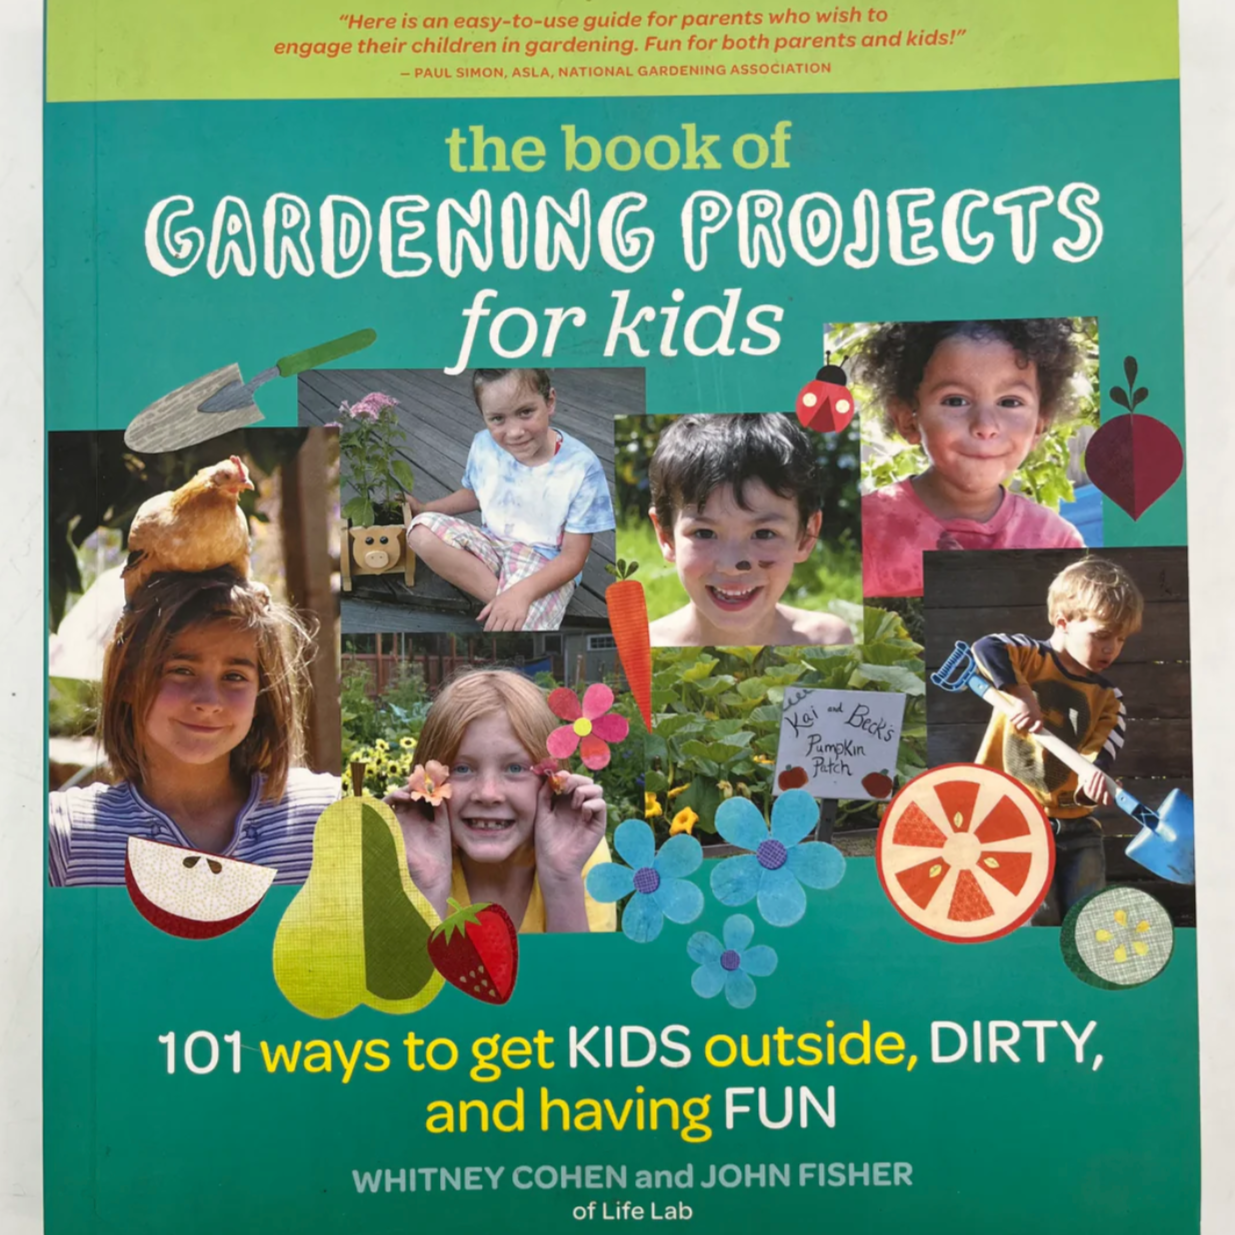 The Book of Gardening Projects For Kids - Whitney Cohen & John Fisher